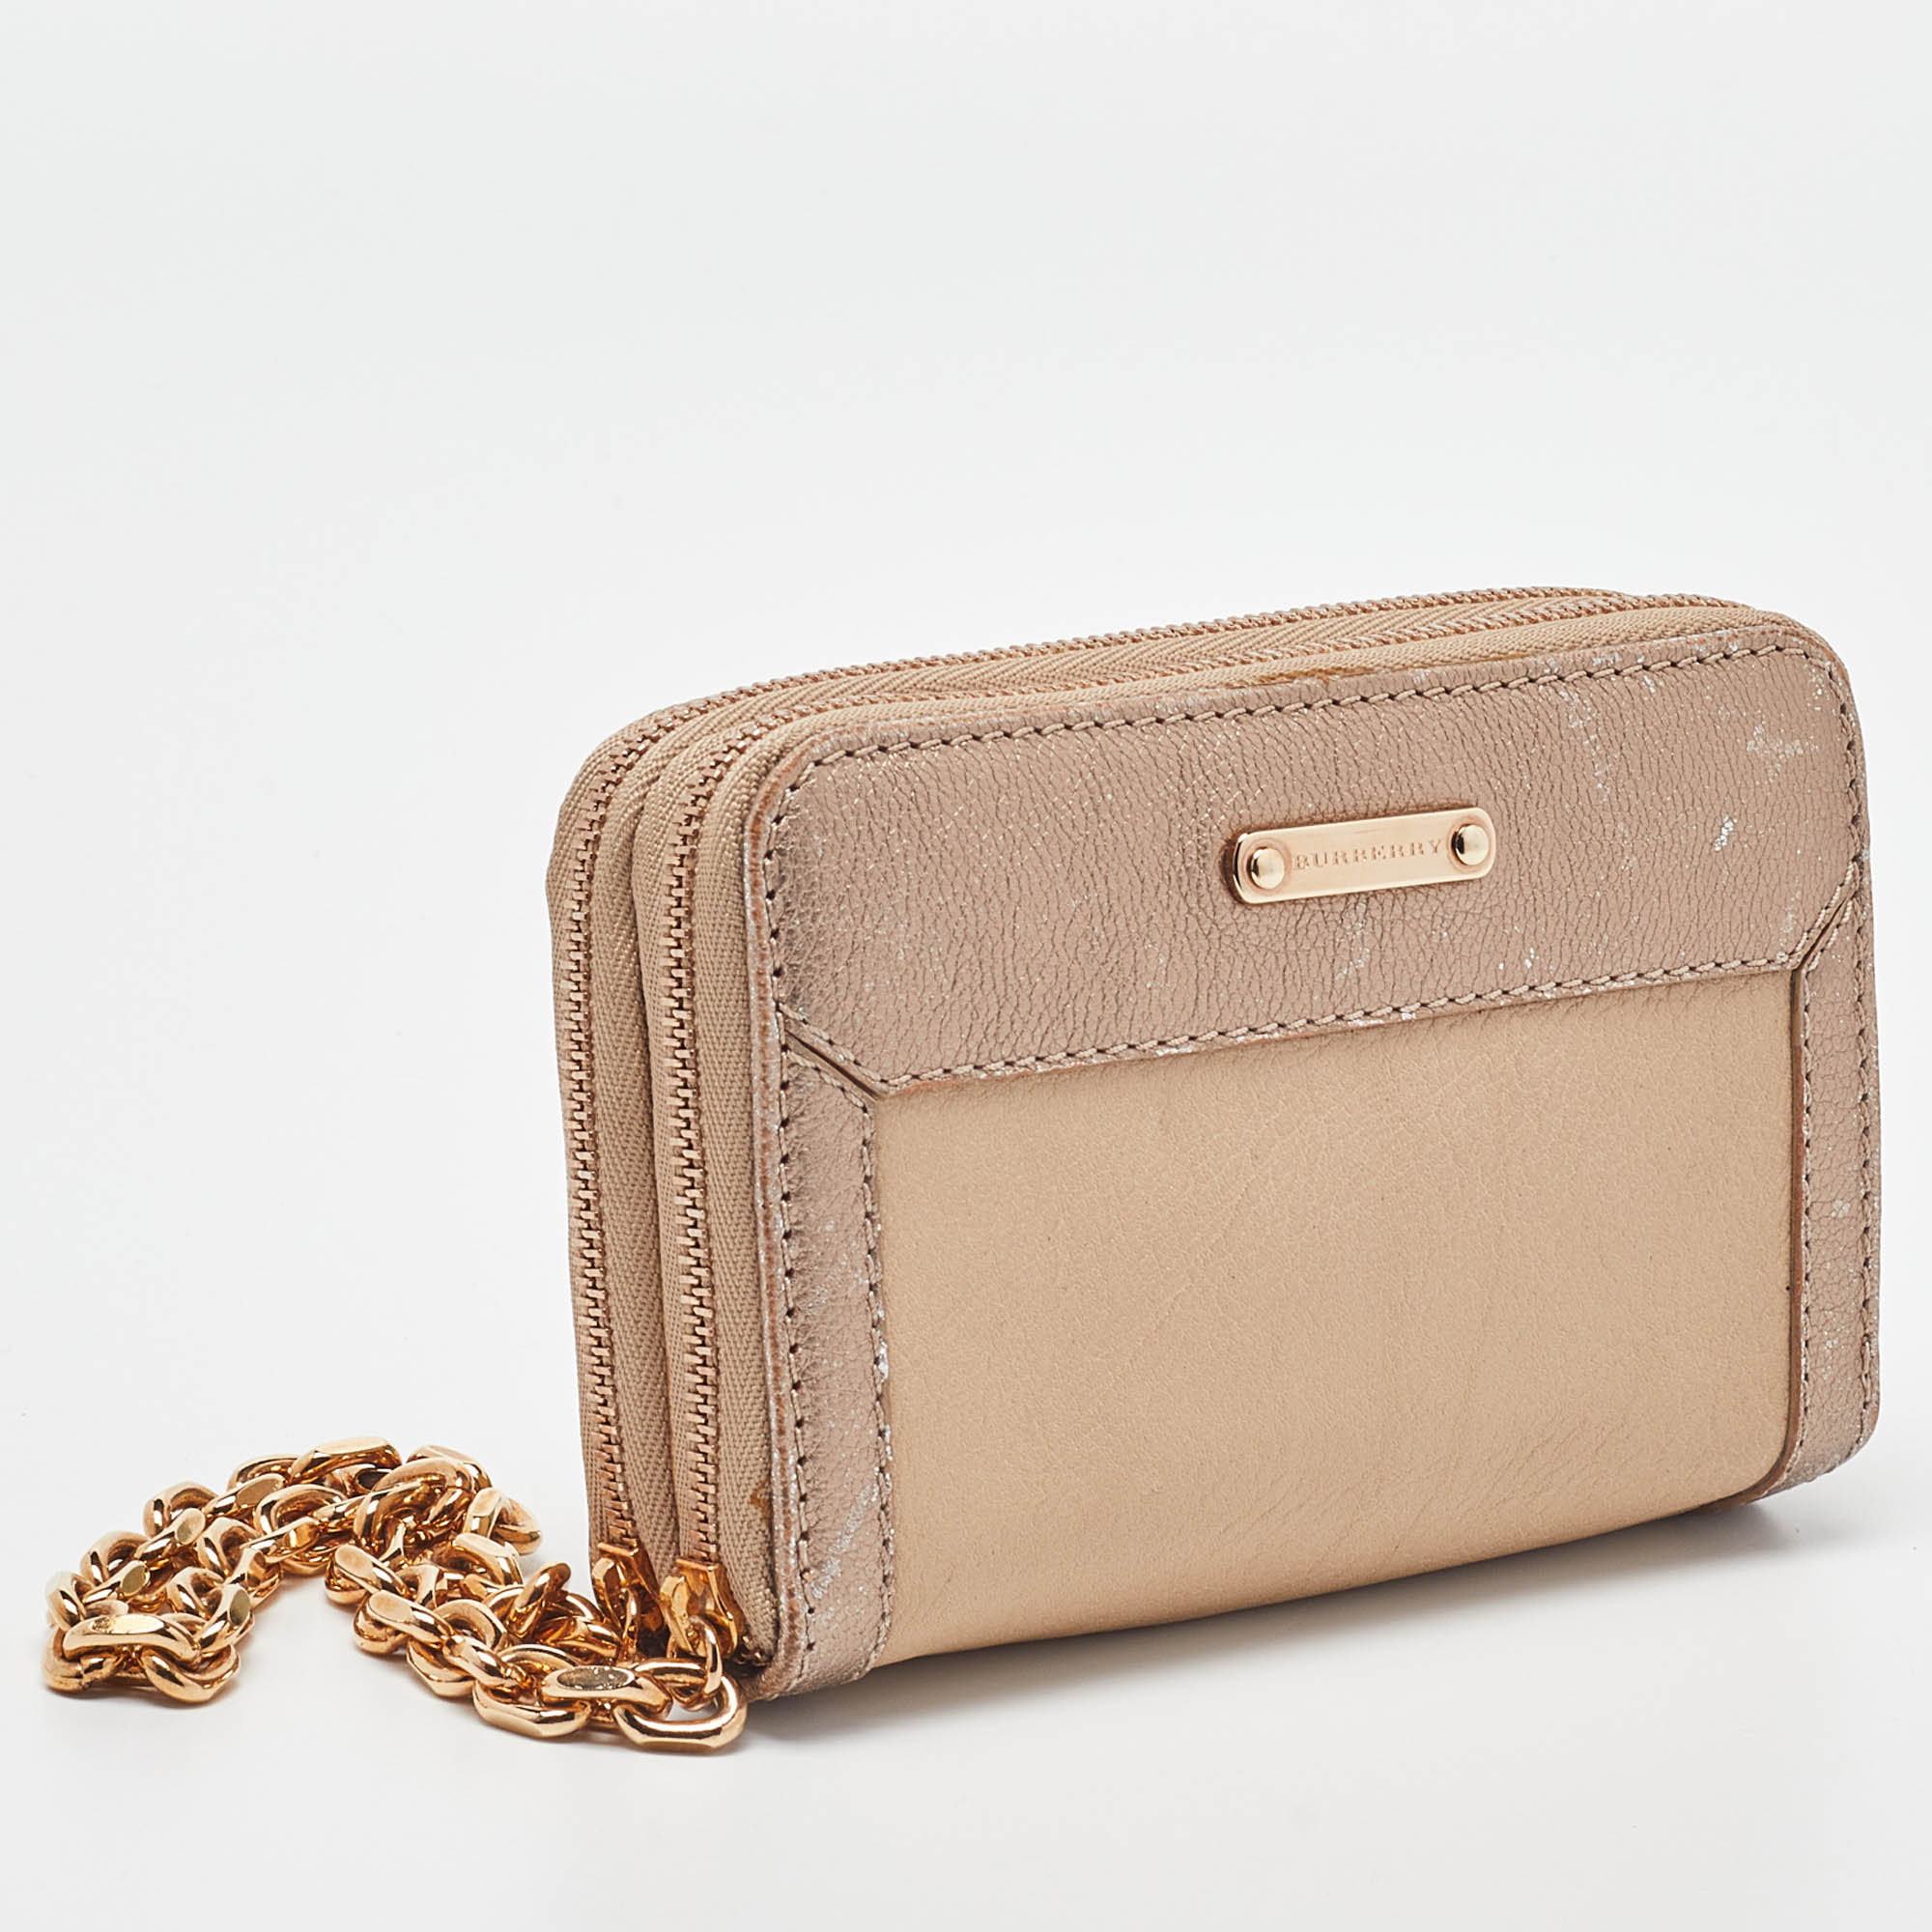 Burberry Beige/Gold Leather Double Zip Chain Wallet